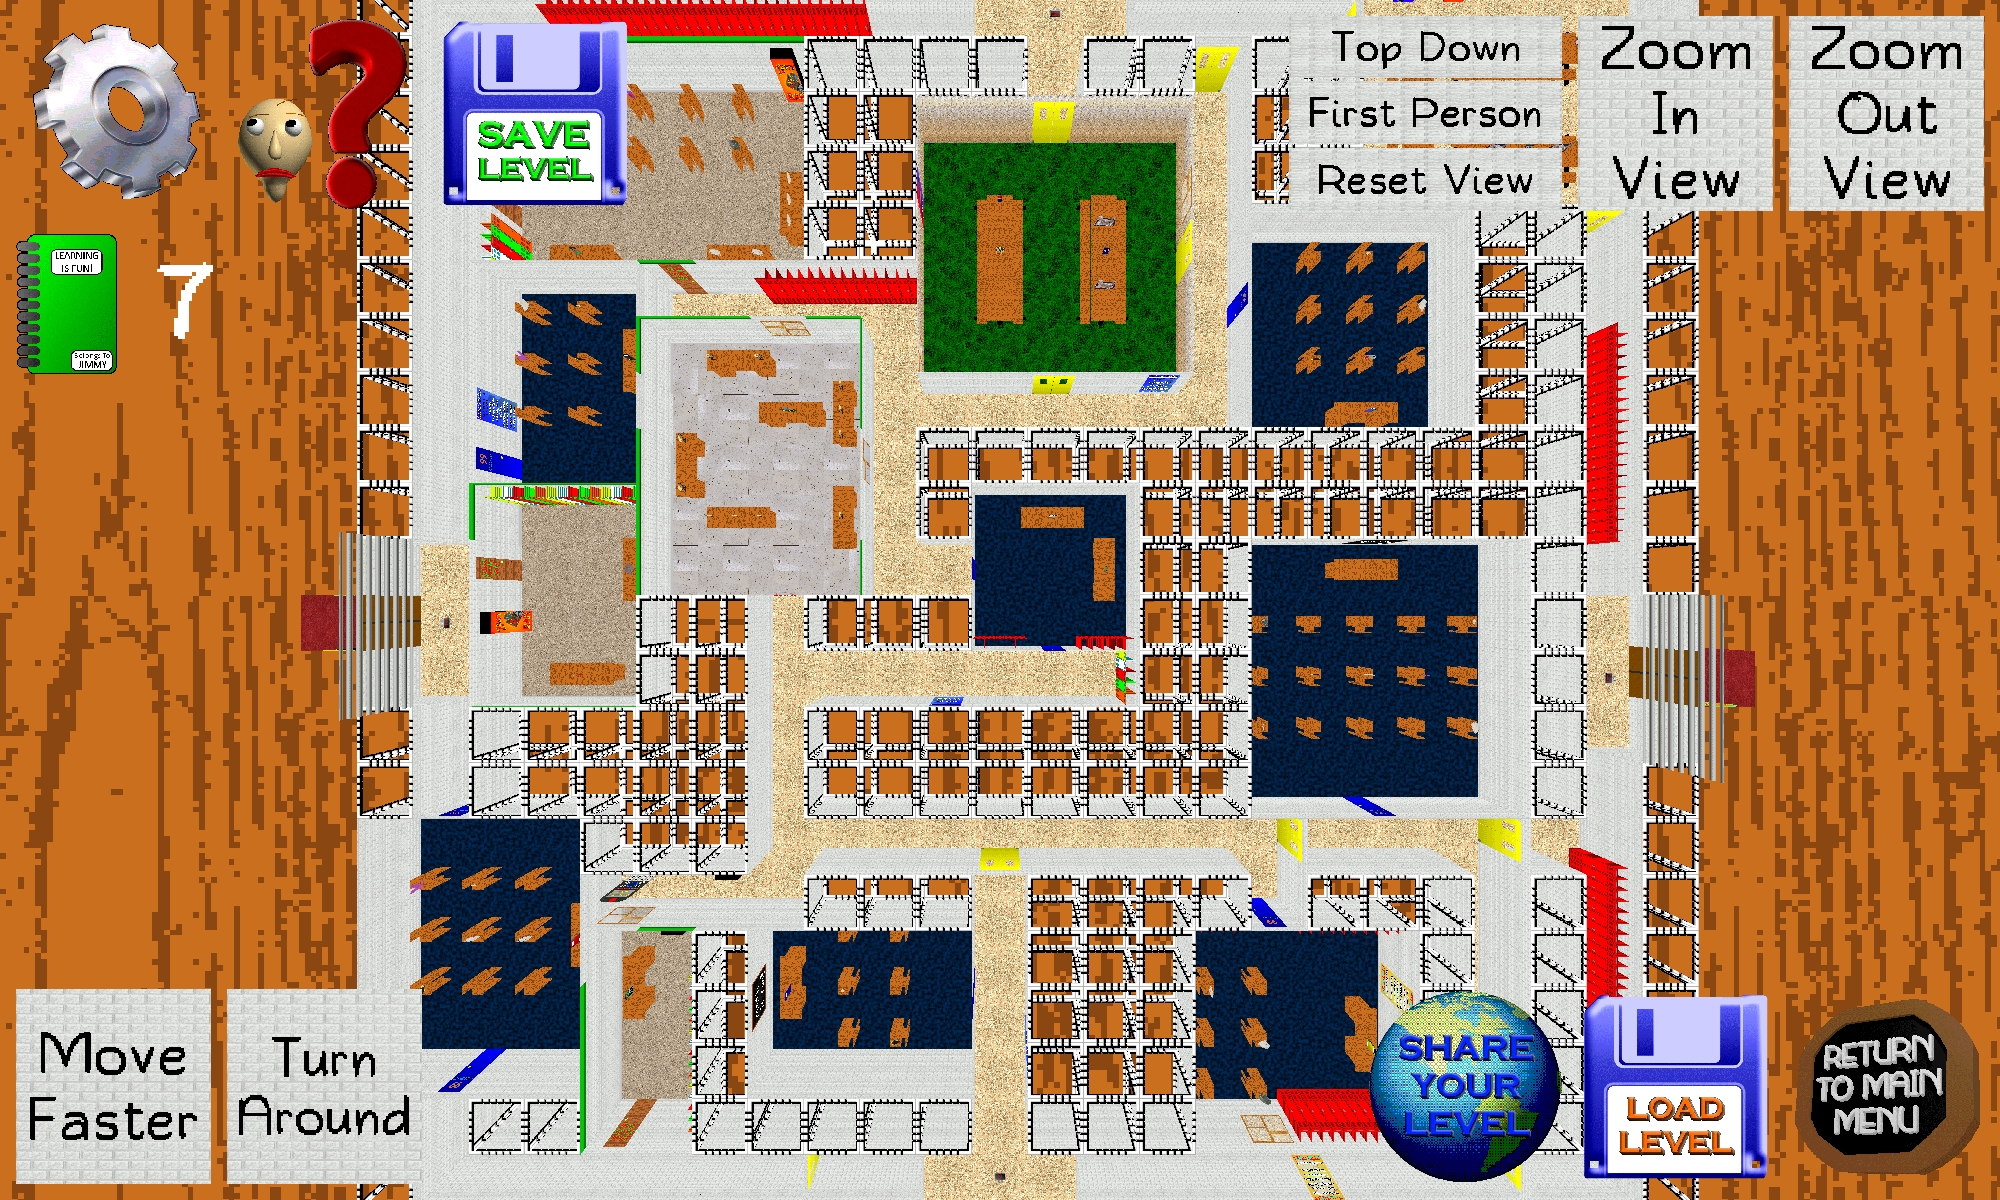 This is my level, so huge! I think JSG will love it!